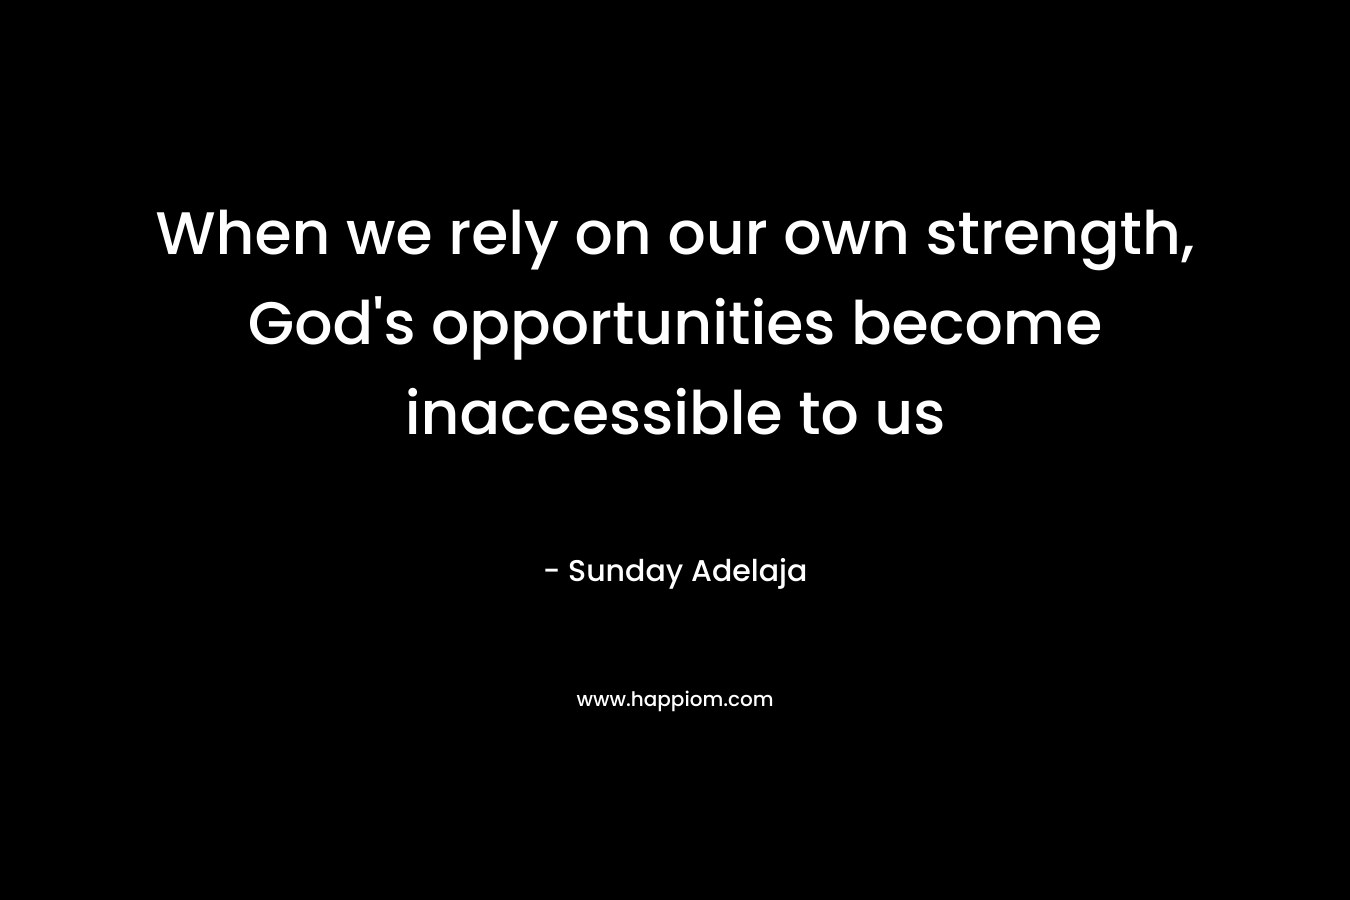 When we rely on our own strength, God's opportunities become inaccessible to us